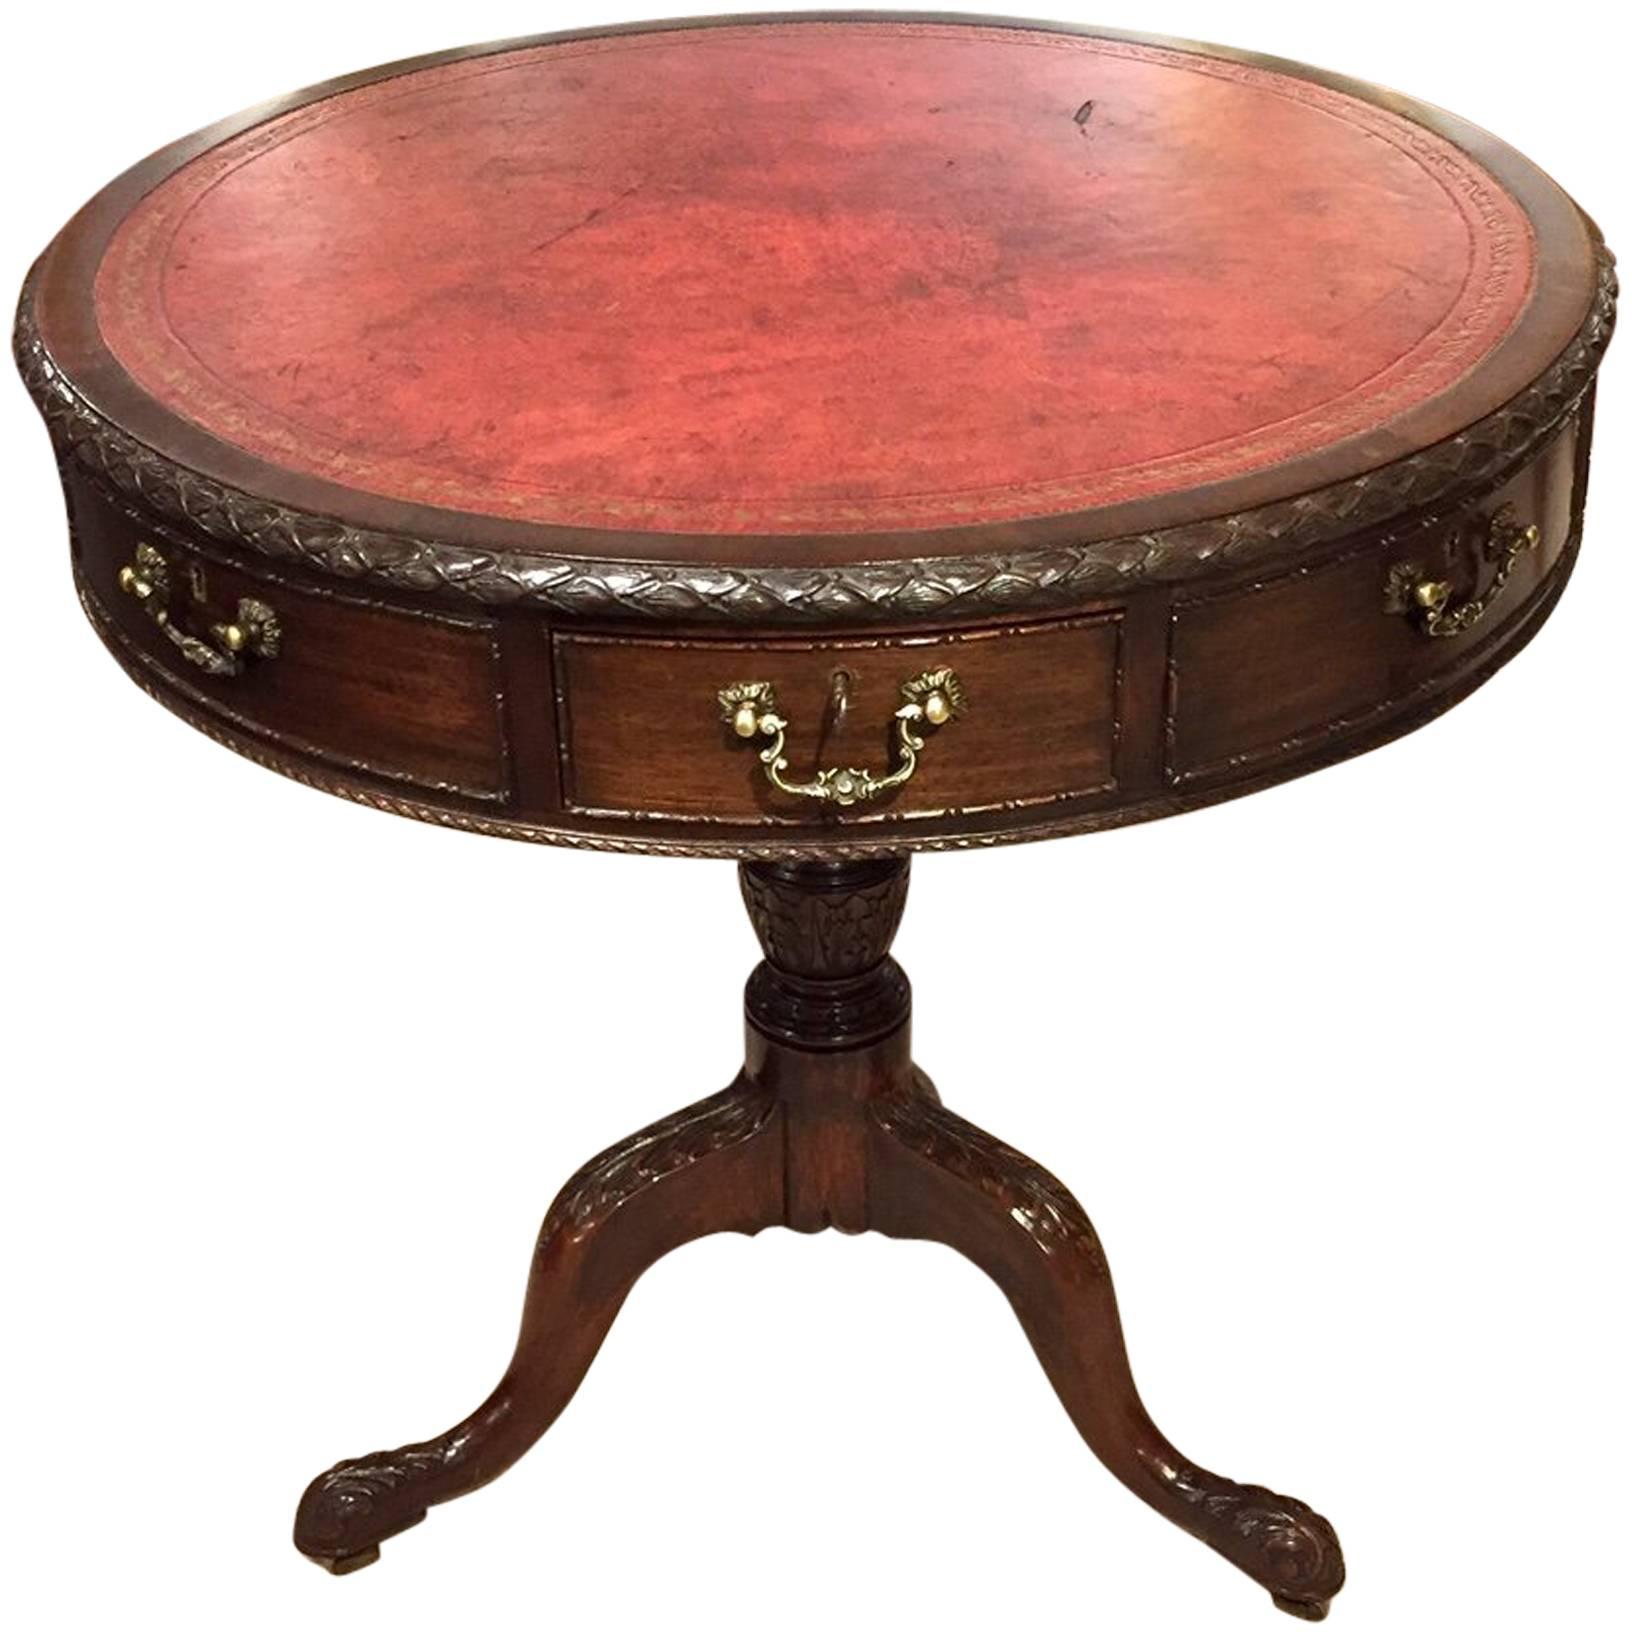 Fine Quality Mahogany Chippendale Revival Antique Drum Table For Sale